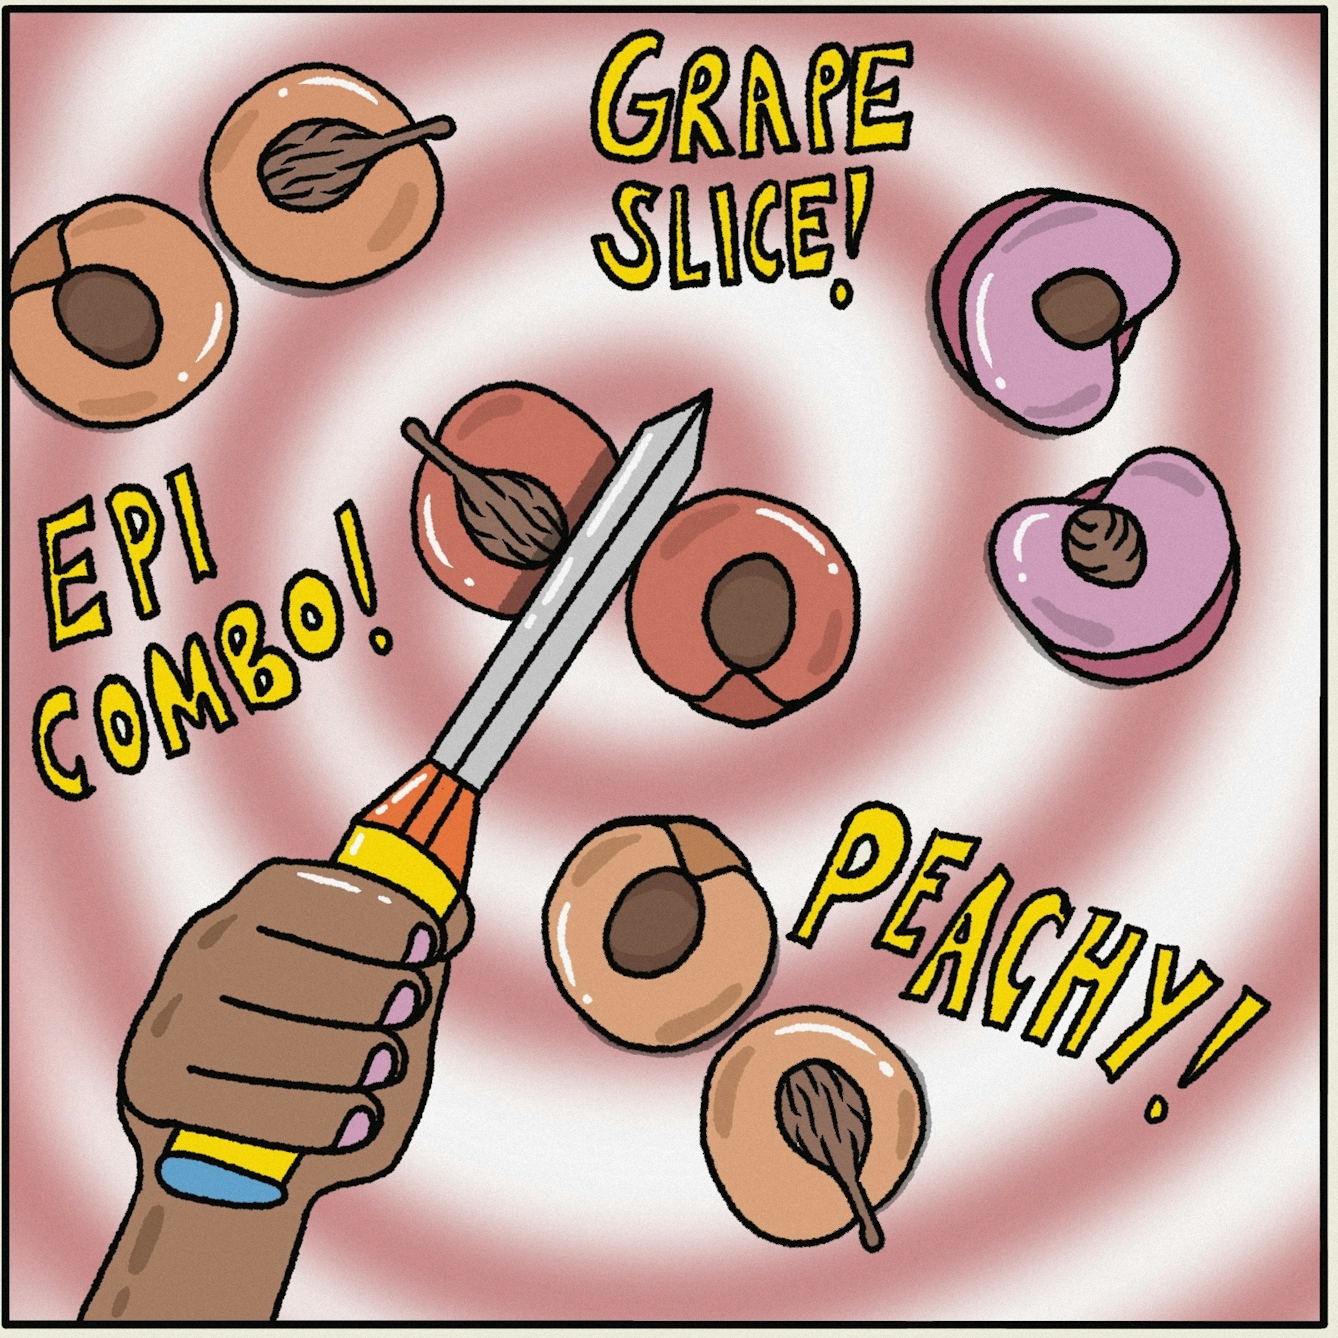 Panel 4 of a digitally drawn, four-panel comic titled ‘Overpowered’. Using your weapon, you’re destroying all the fruit. The text reads ‘GRAPE SLICE!’, ‘EPI-COMBO!’ and ‘PEACHY!’ 